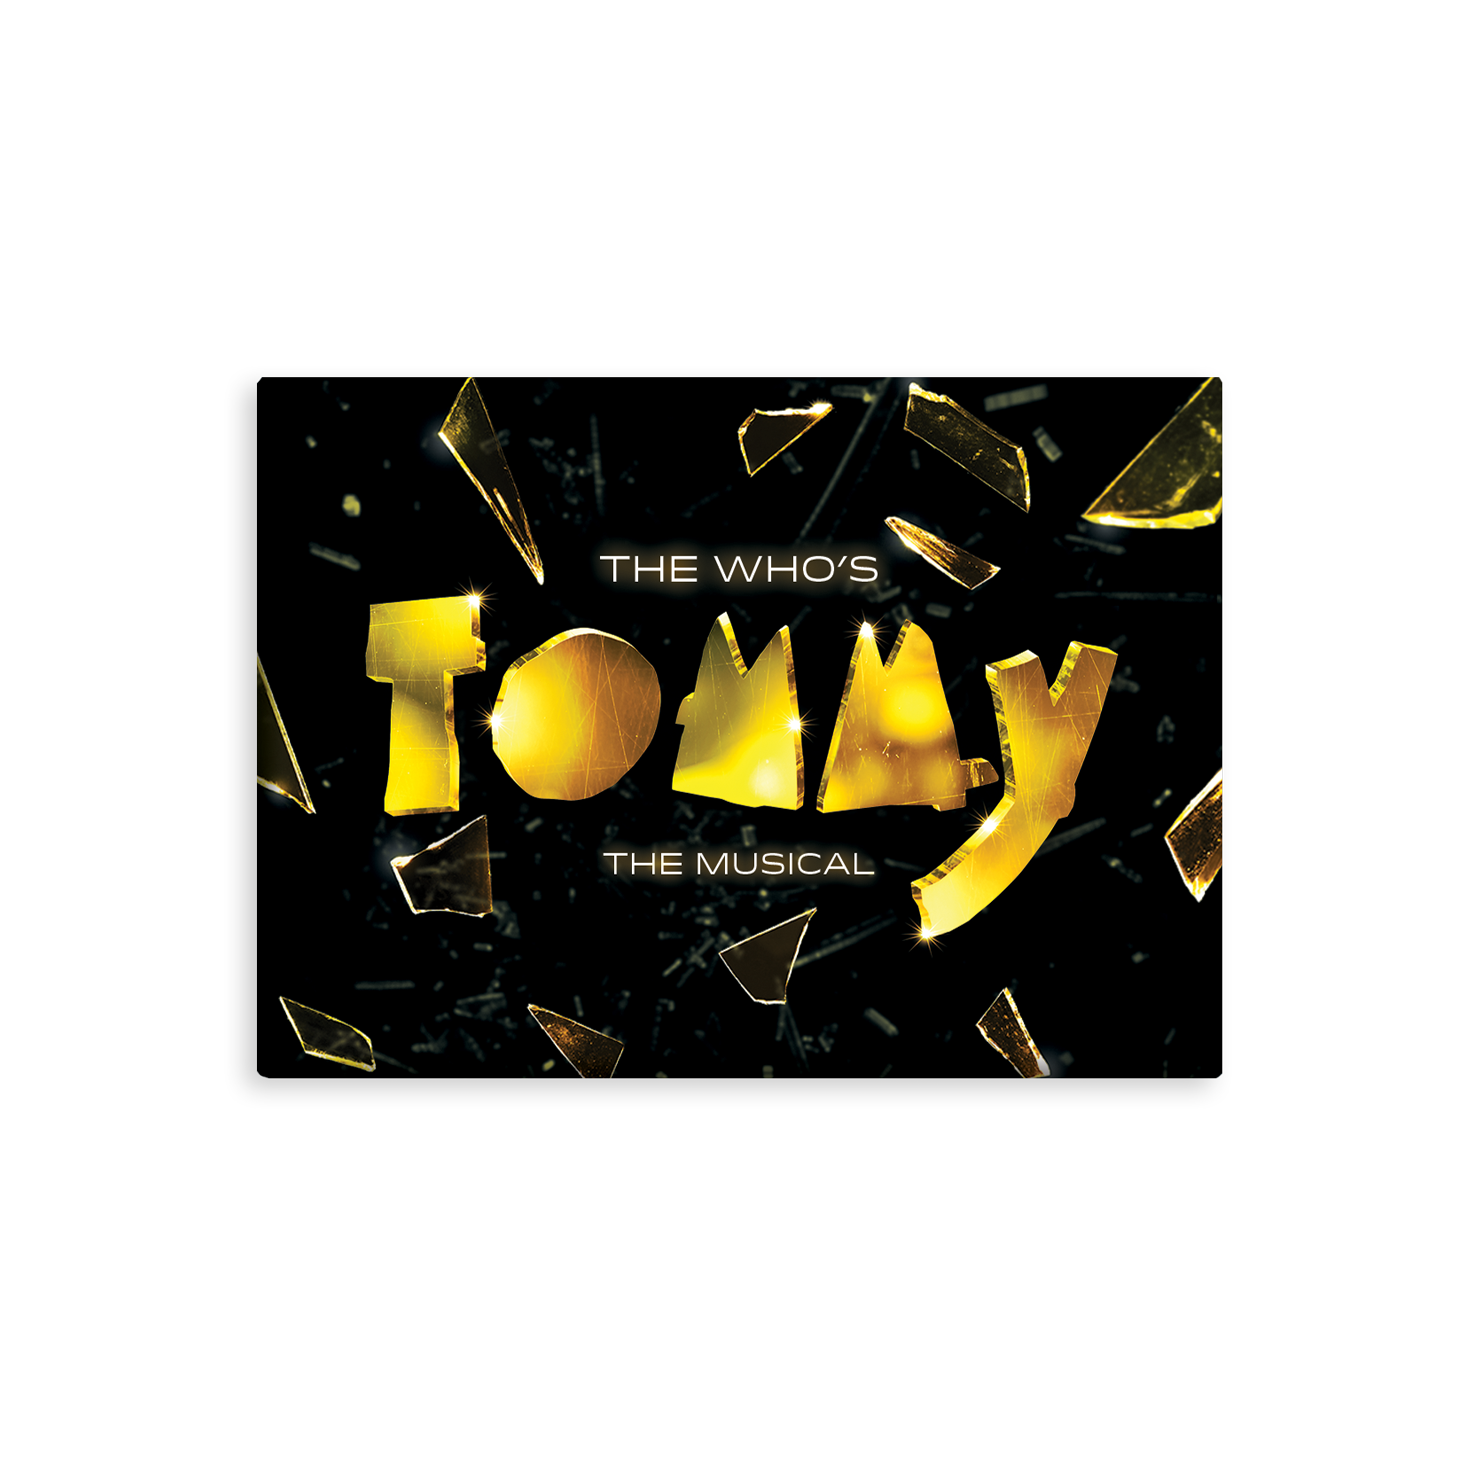 THE WHO'S TOMMY Title Magnet Image